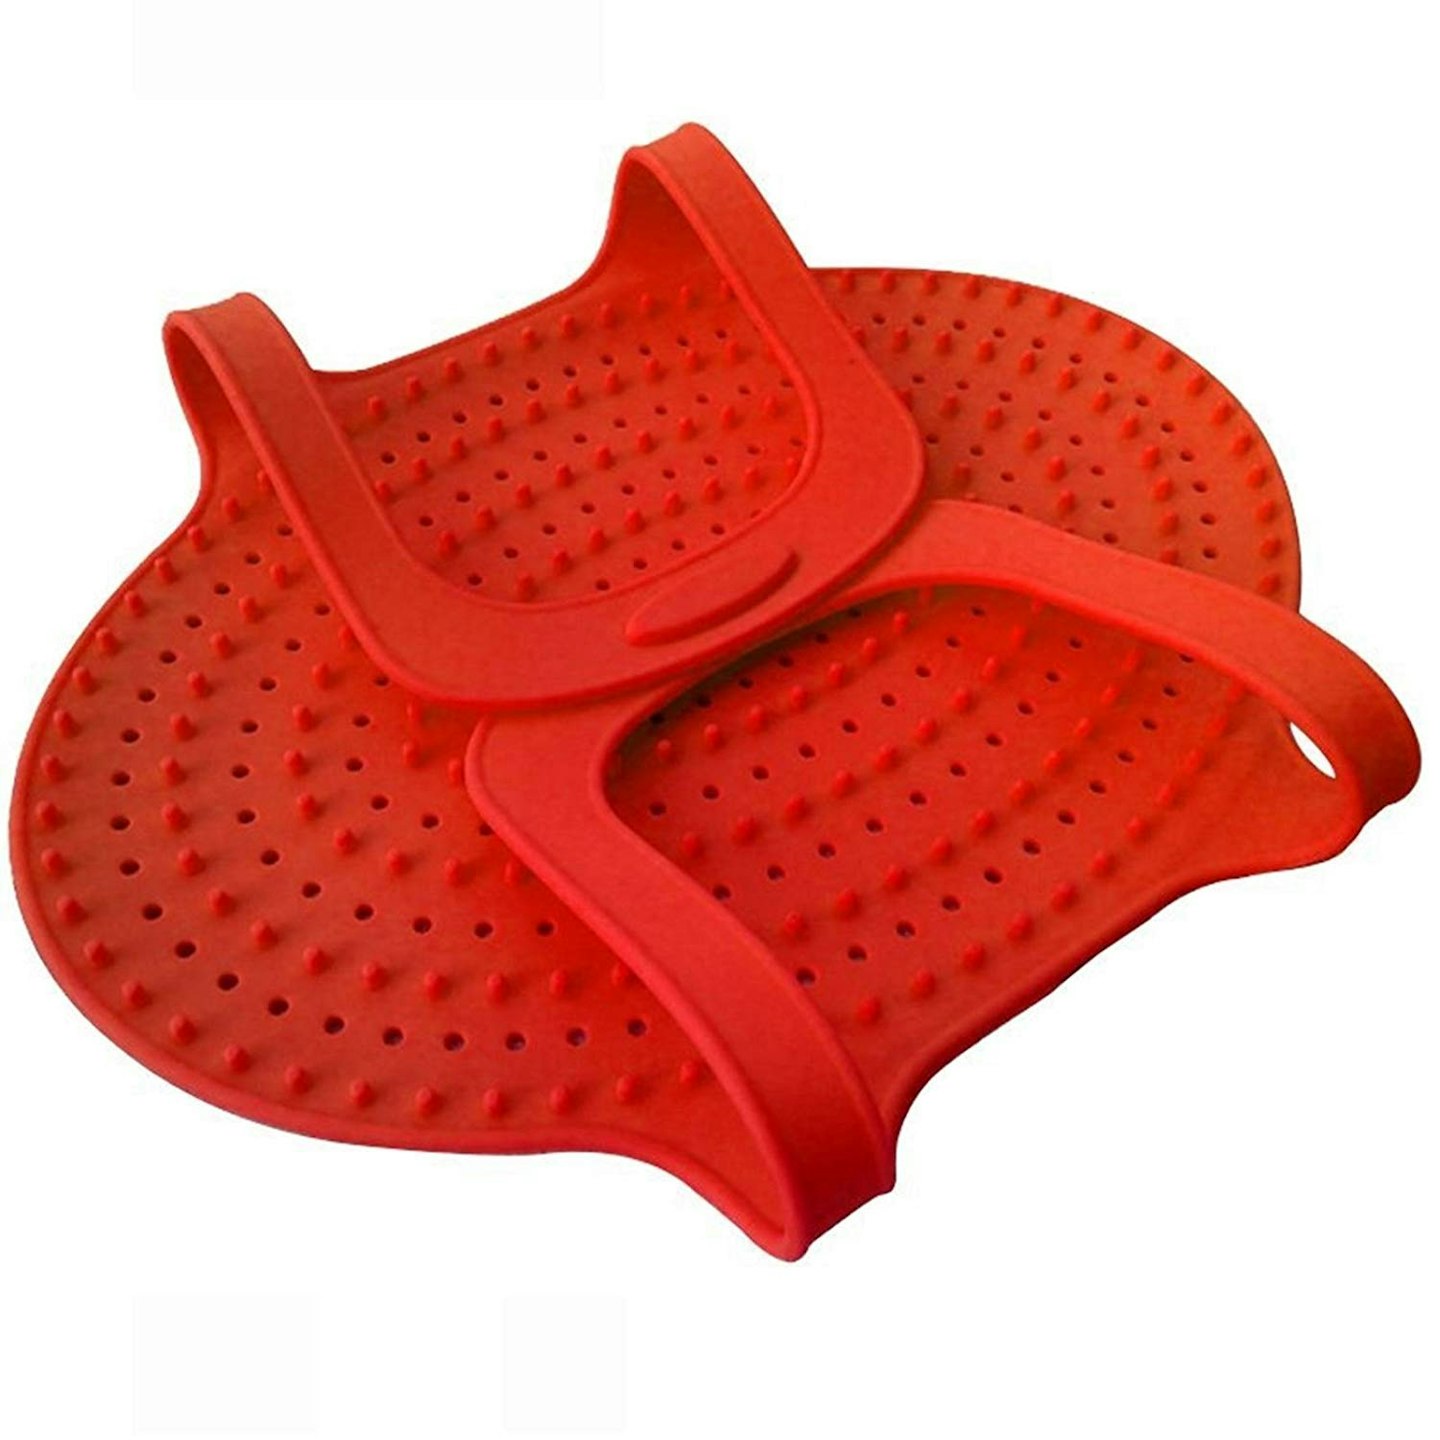 Gr8 Home Silicone Meat Lifter